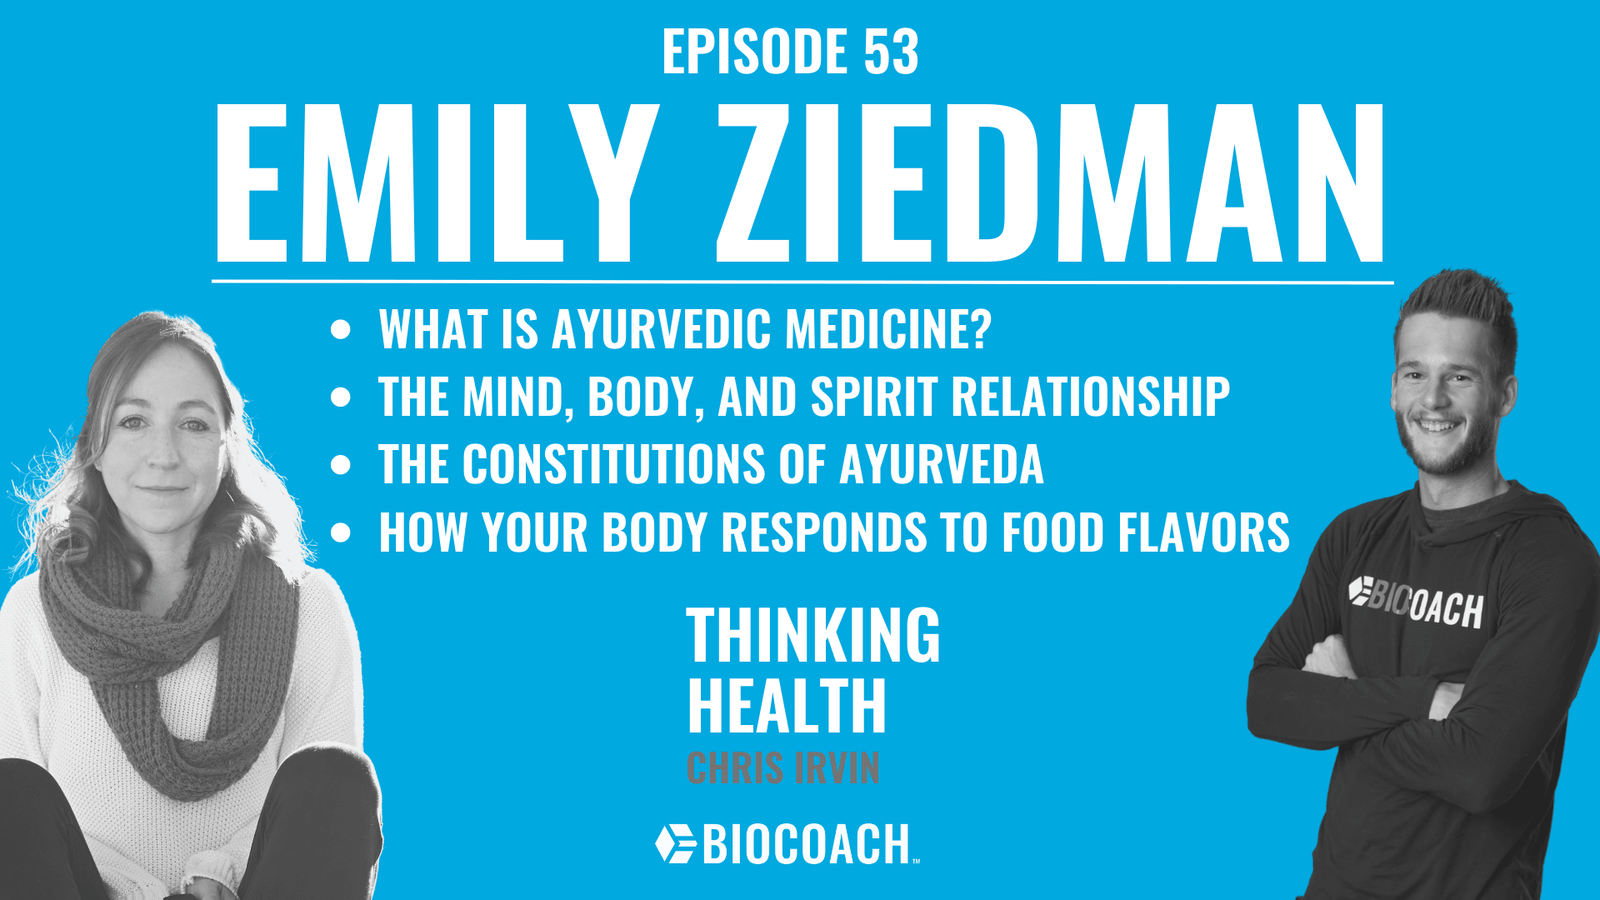 Episode #53: Emily Ziedman: Ayurvedic Medicine, The Constitutions of Ayurveda, and How Flavor Affects Your Mind, Body, and Spirit - BioCoach